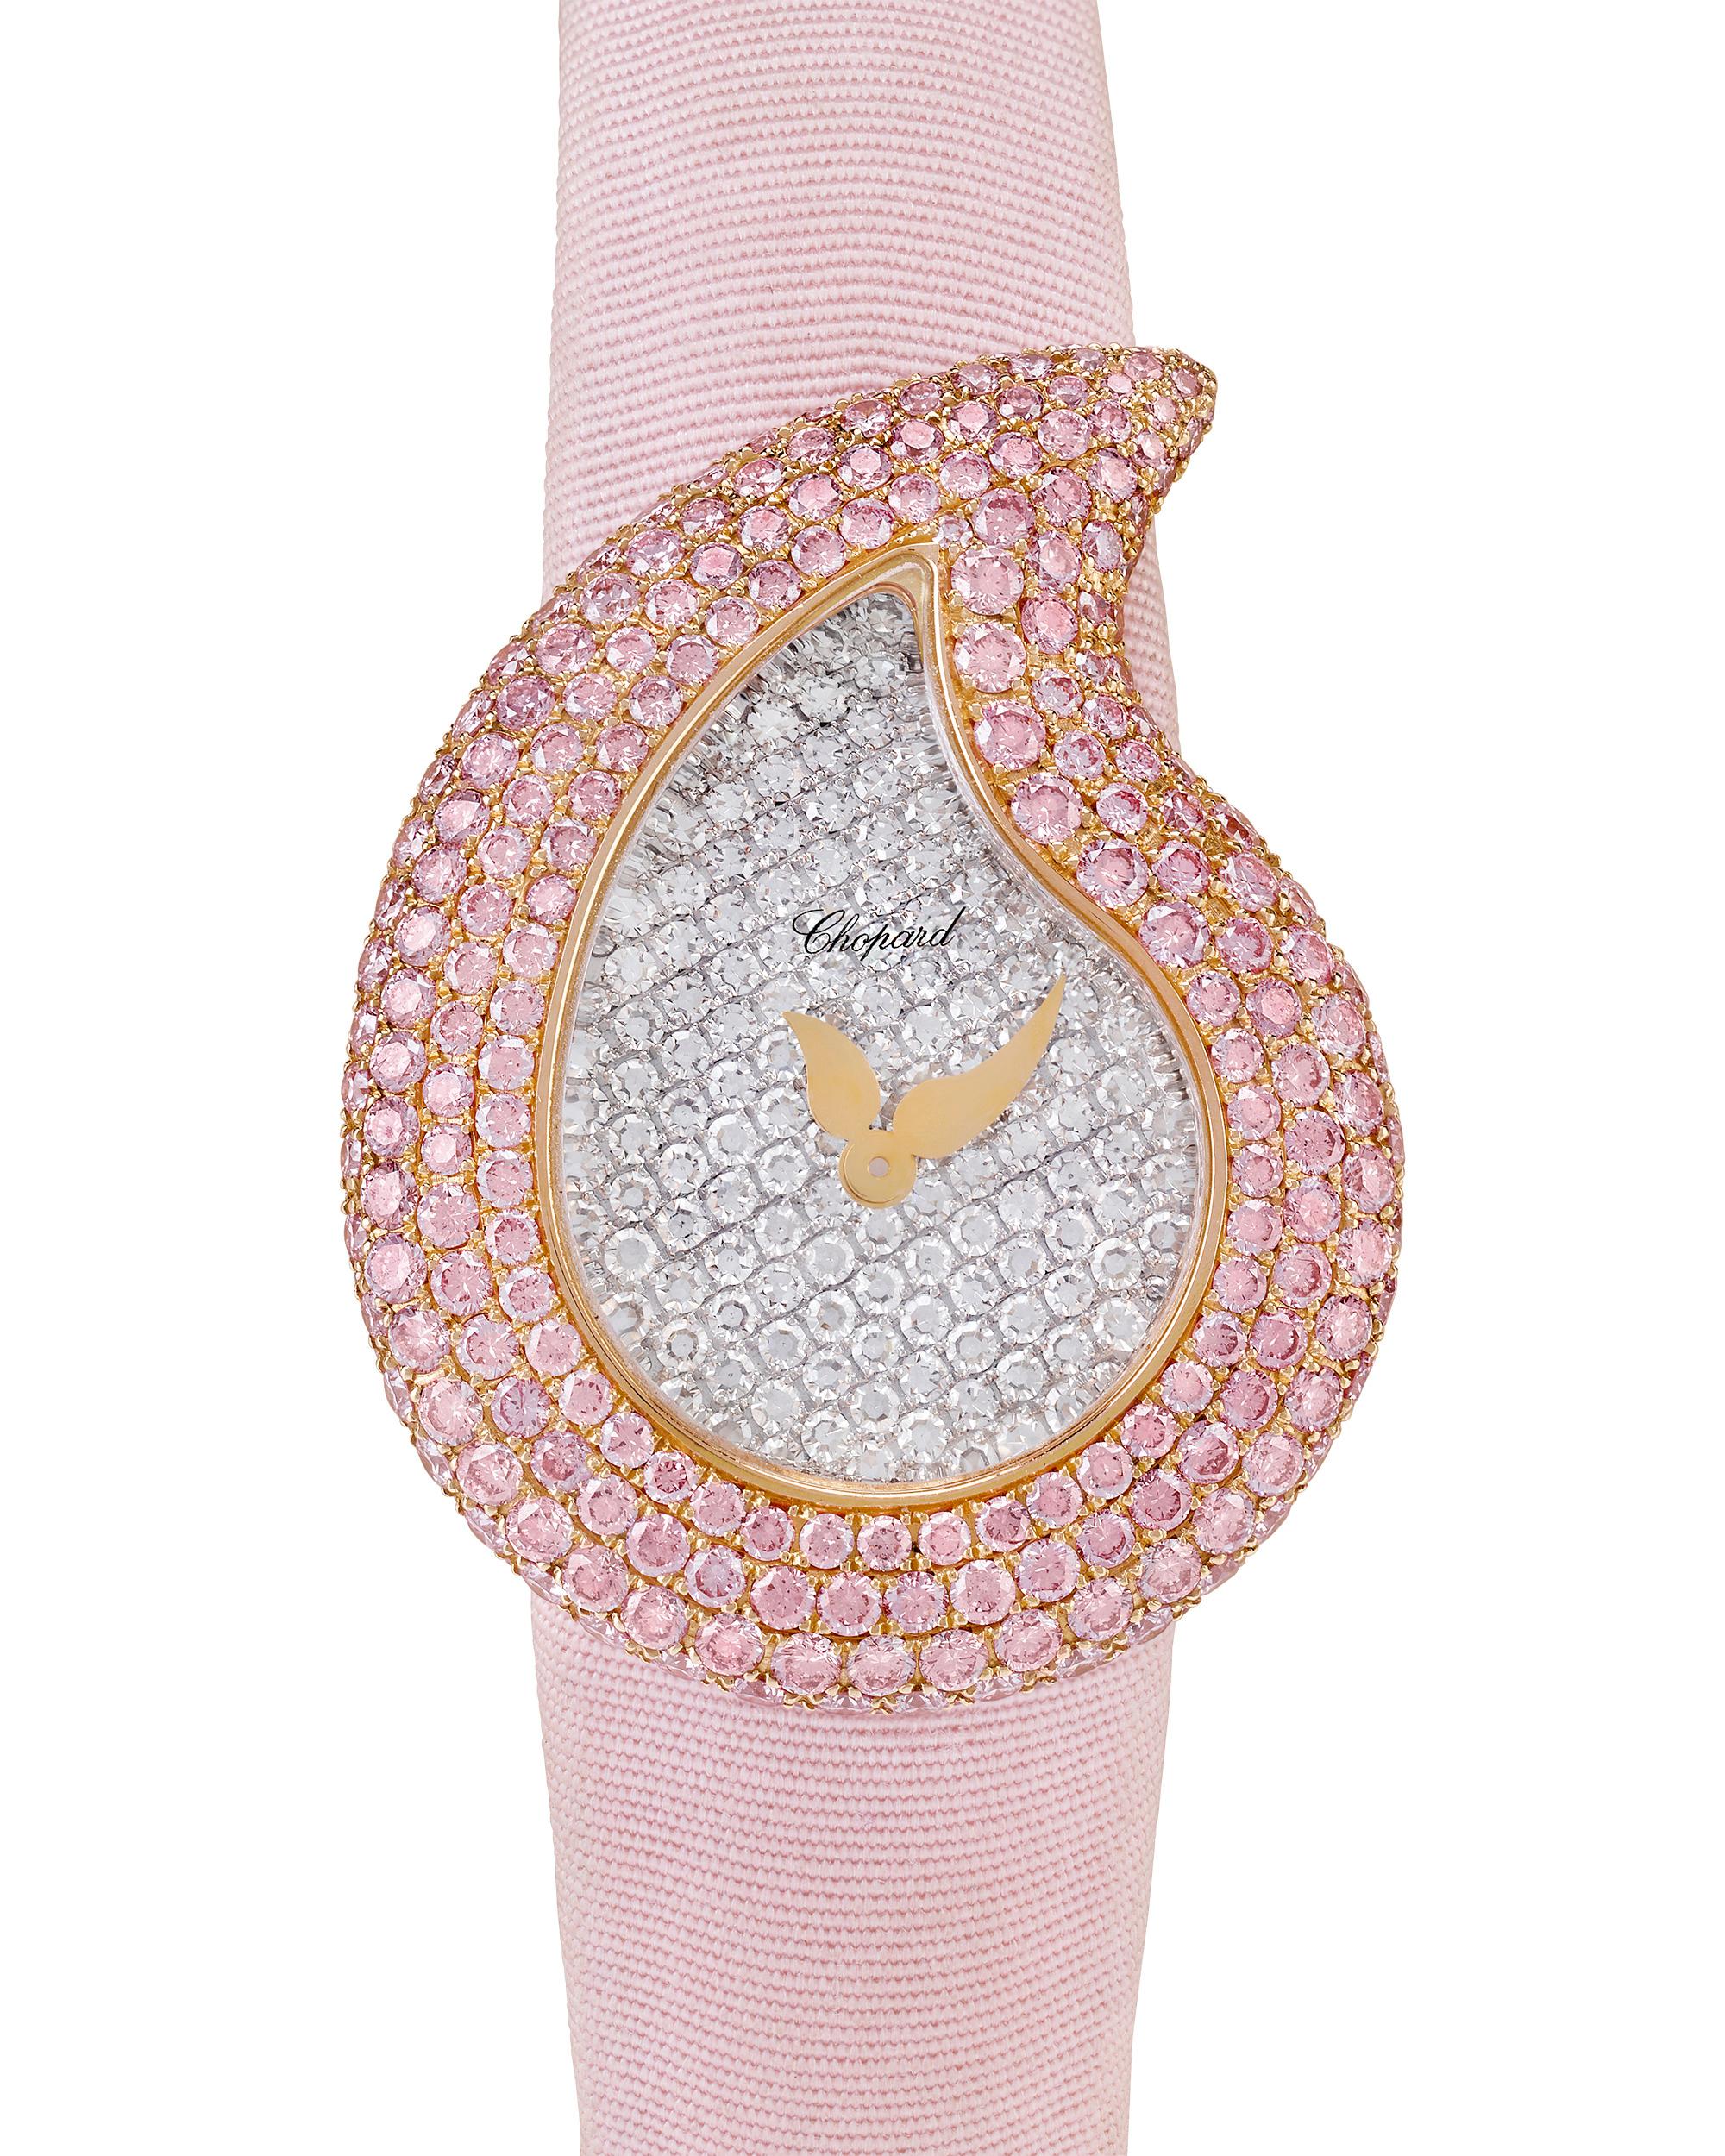 Simply stunning in every sense, this limited edition Chopard quartz watch is the essence of luxury. Part of the Casmir collection, this timepiece boasts 334 natural fancy pink diamonds weighing 3.38 total carats and 0.91 carats of white diamonds